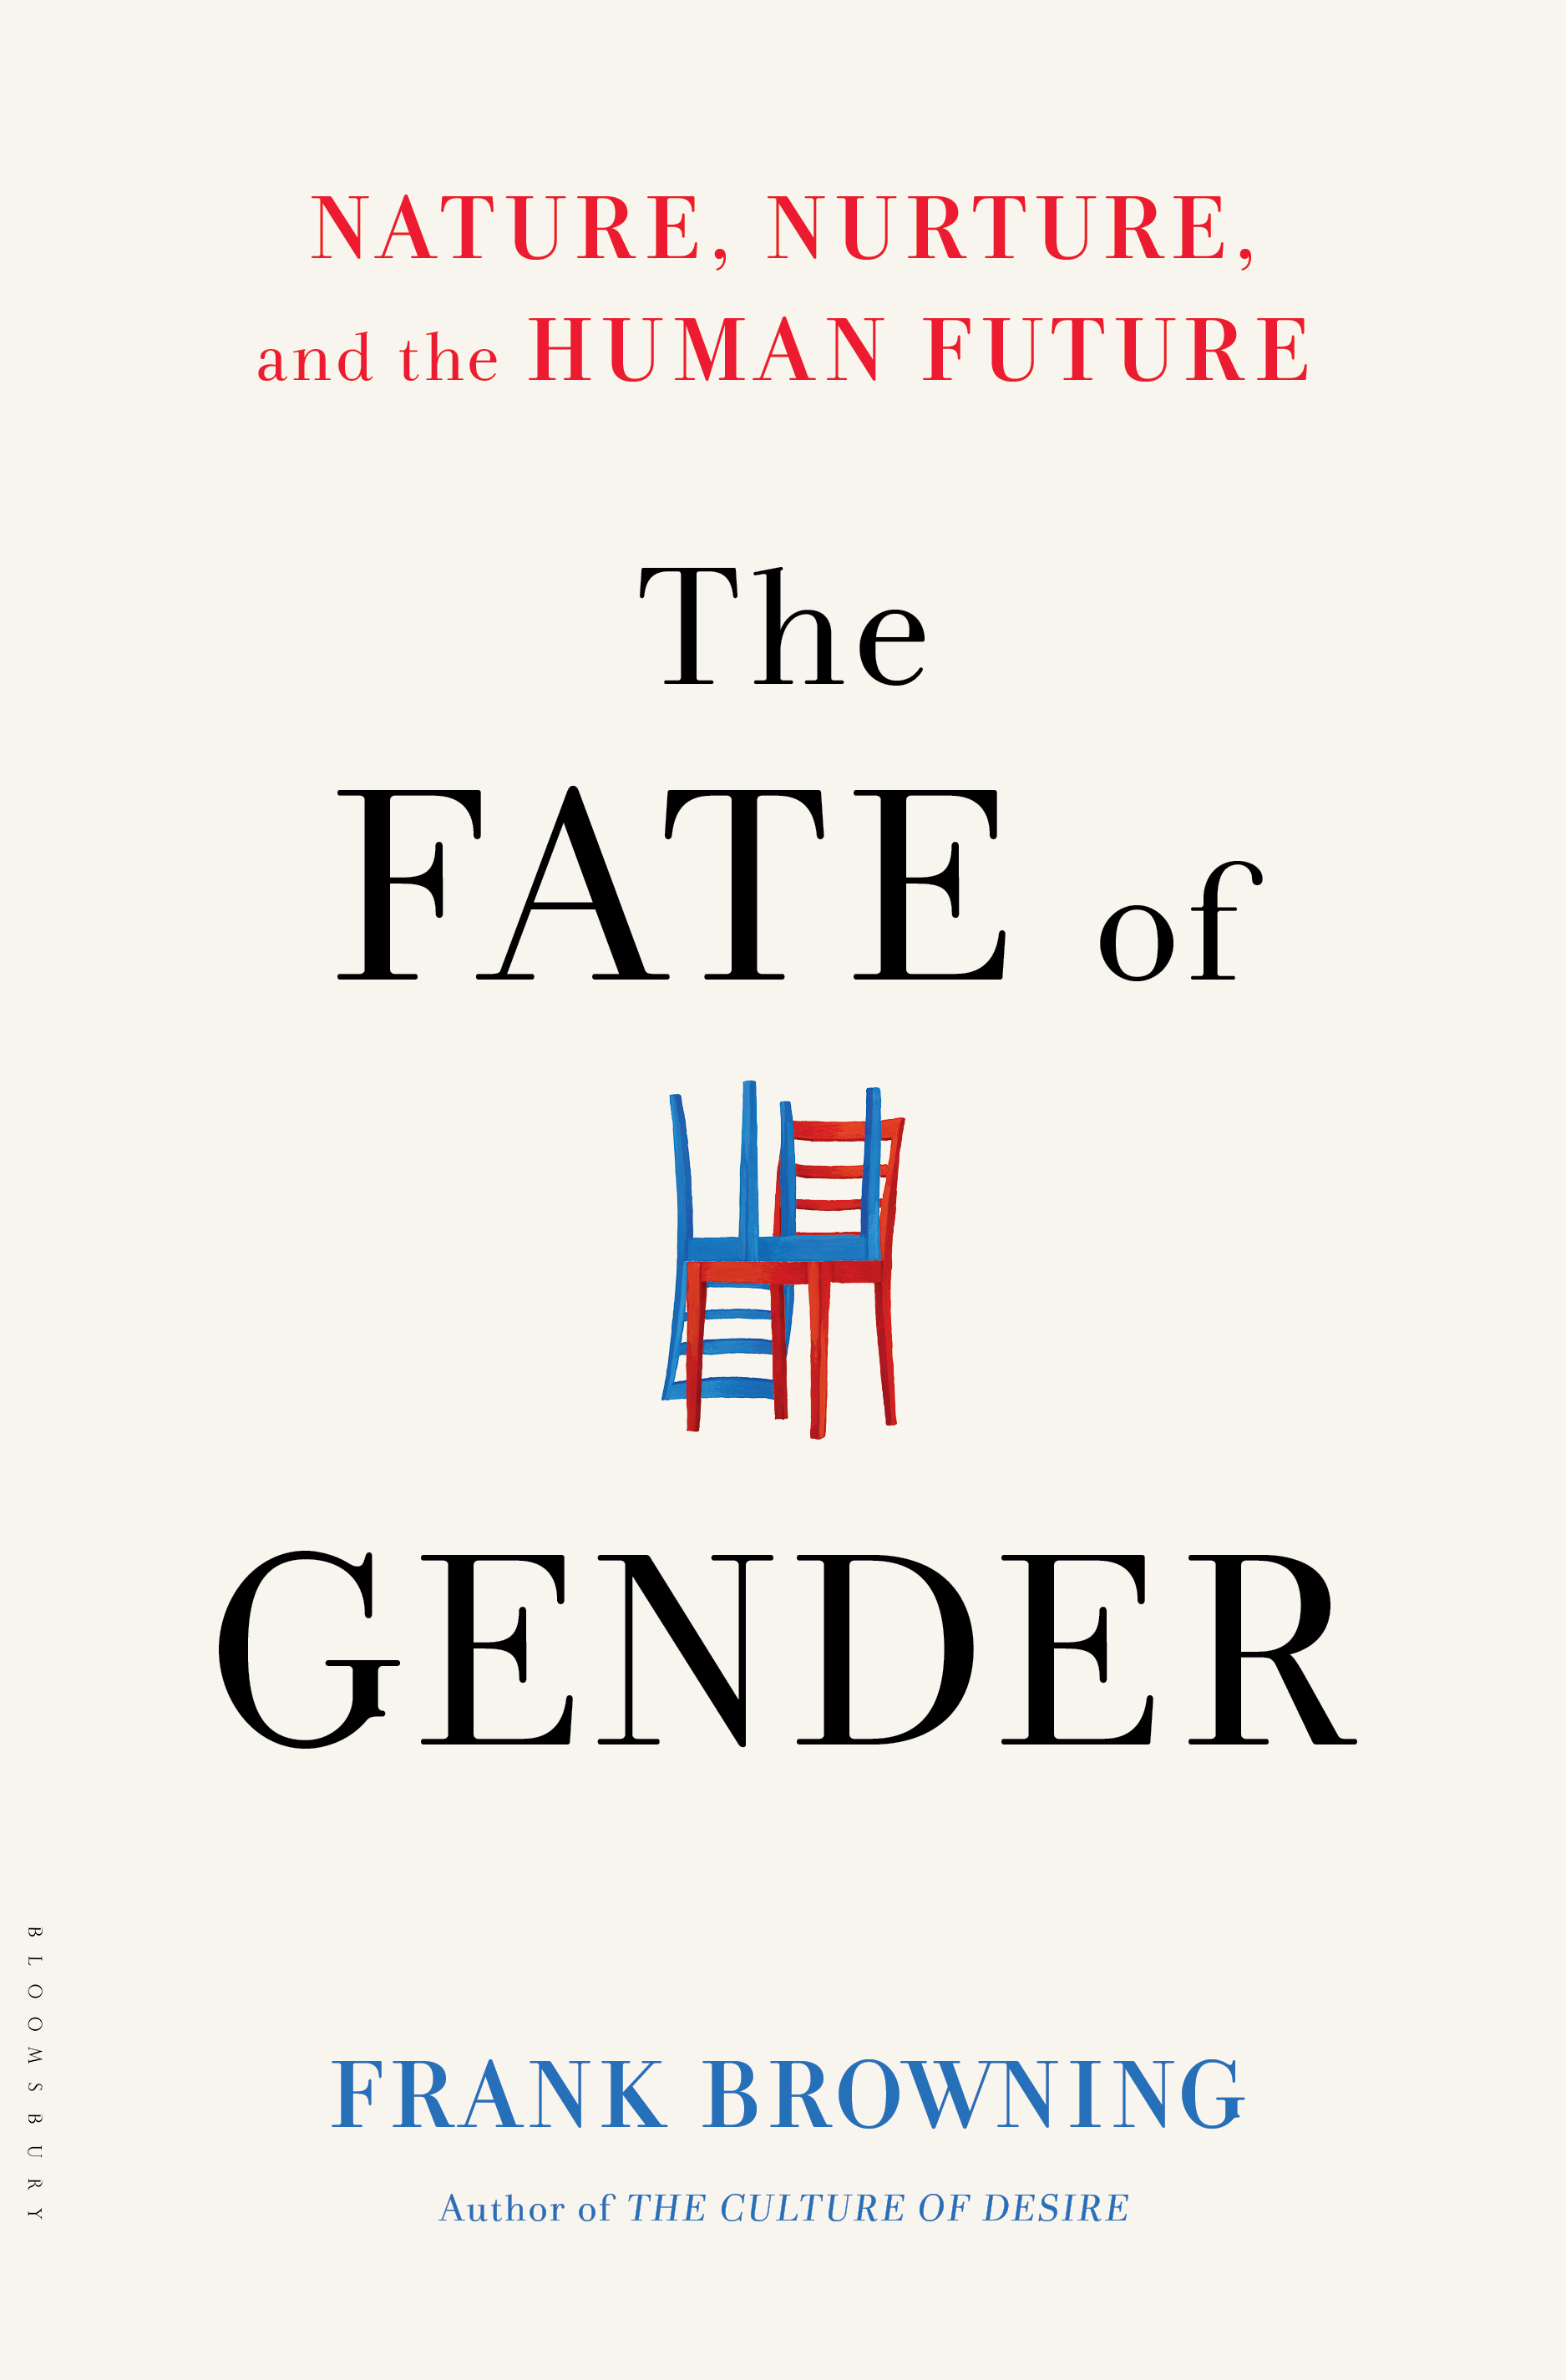 THE FATE OF GENDER